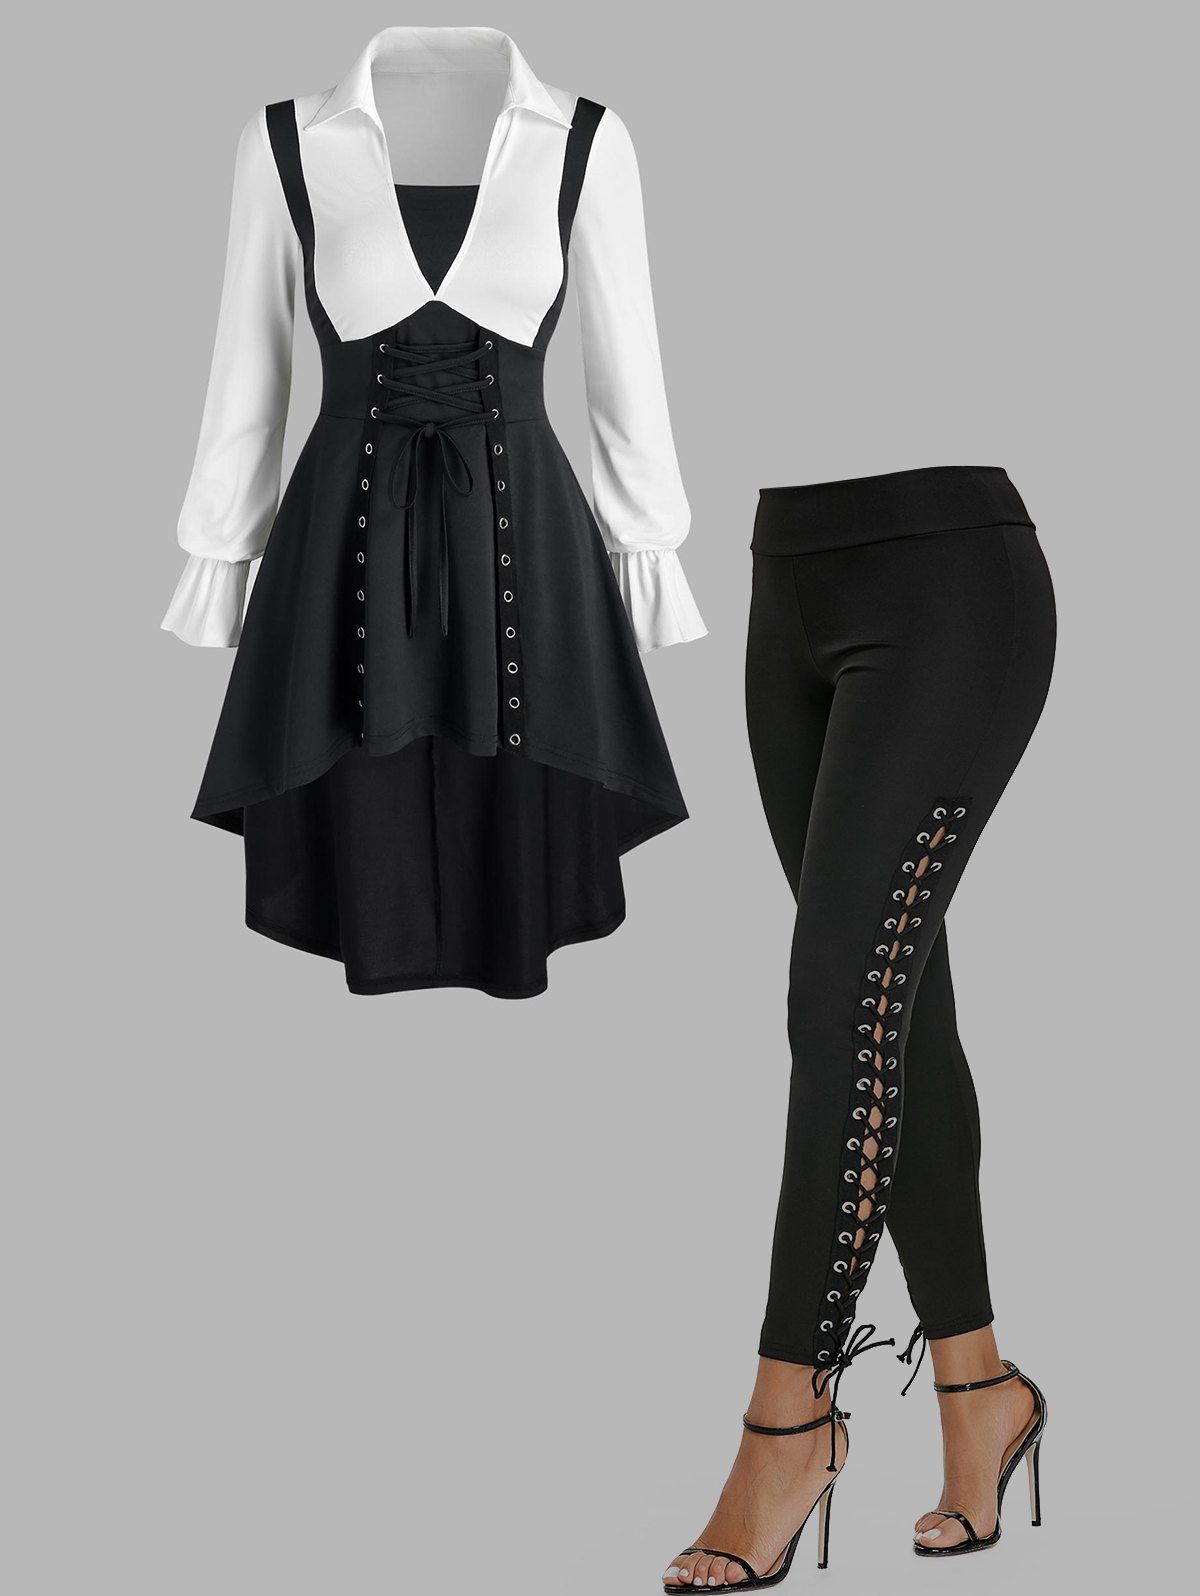 Eyelet Lace-up Contrast High Low Faux Twinset T-shirt And Plain Lace Up Skinny Pants Outfit - BLACK S